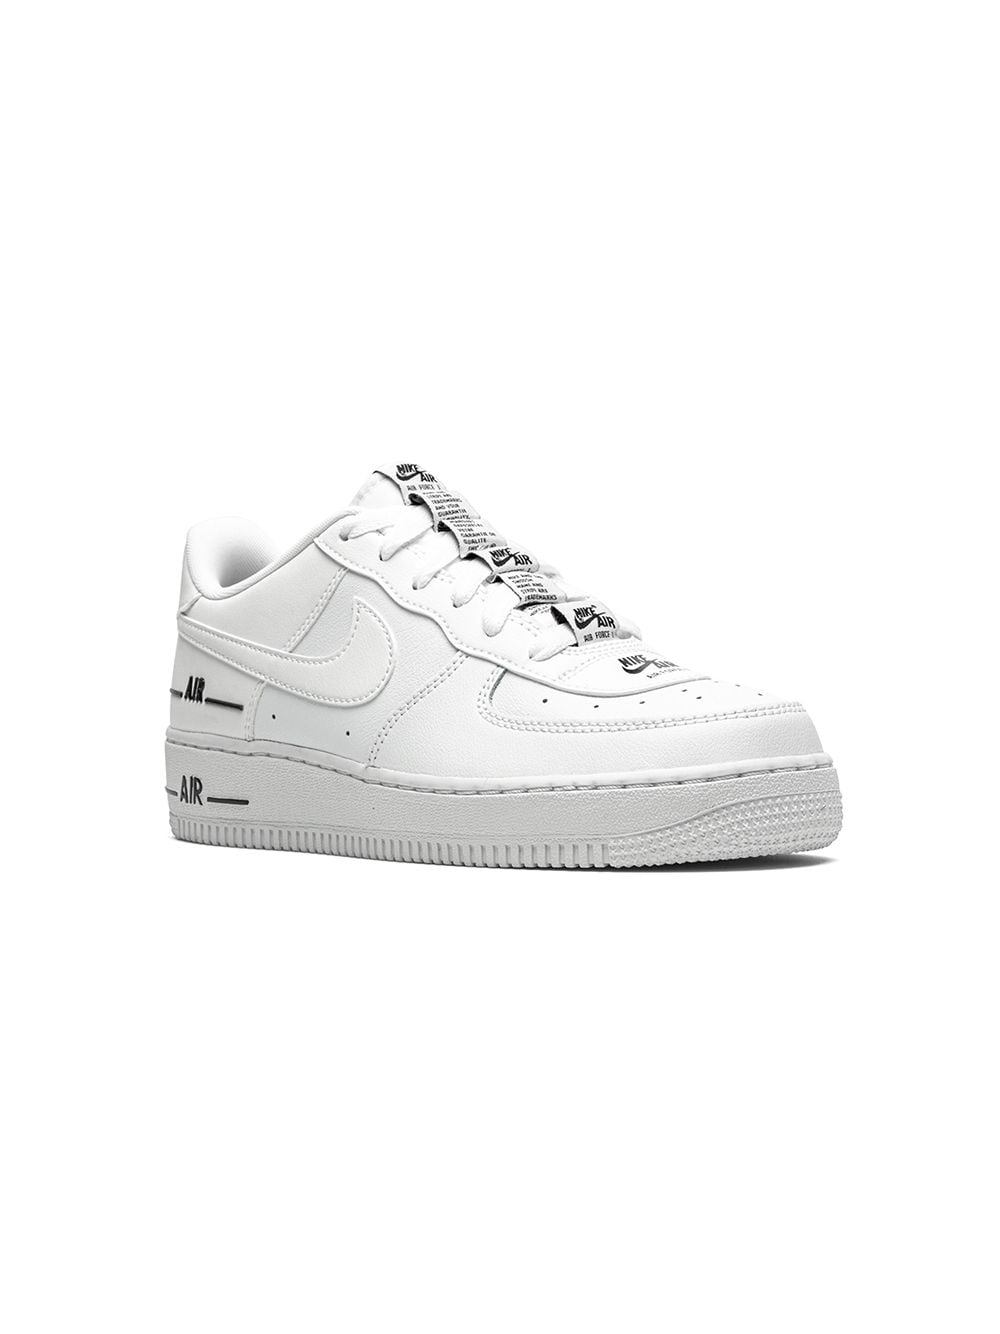 air force ones lv8 3